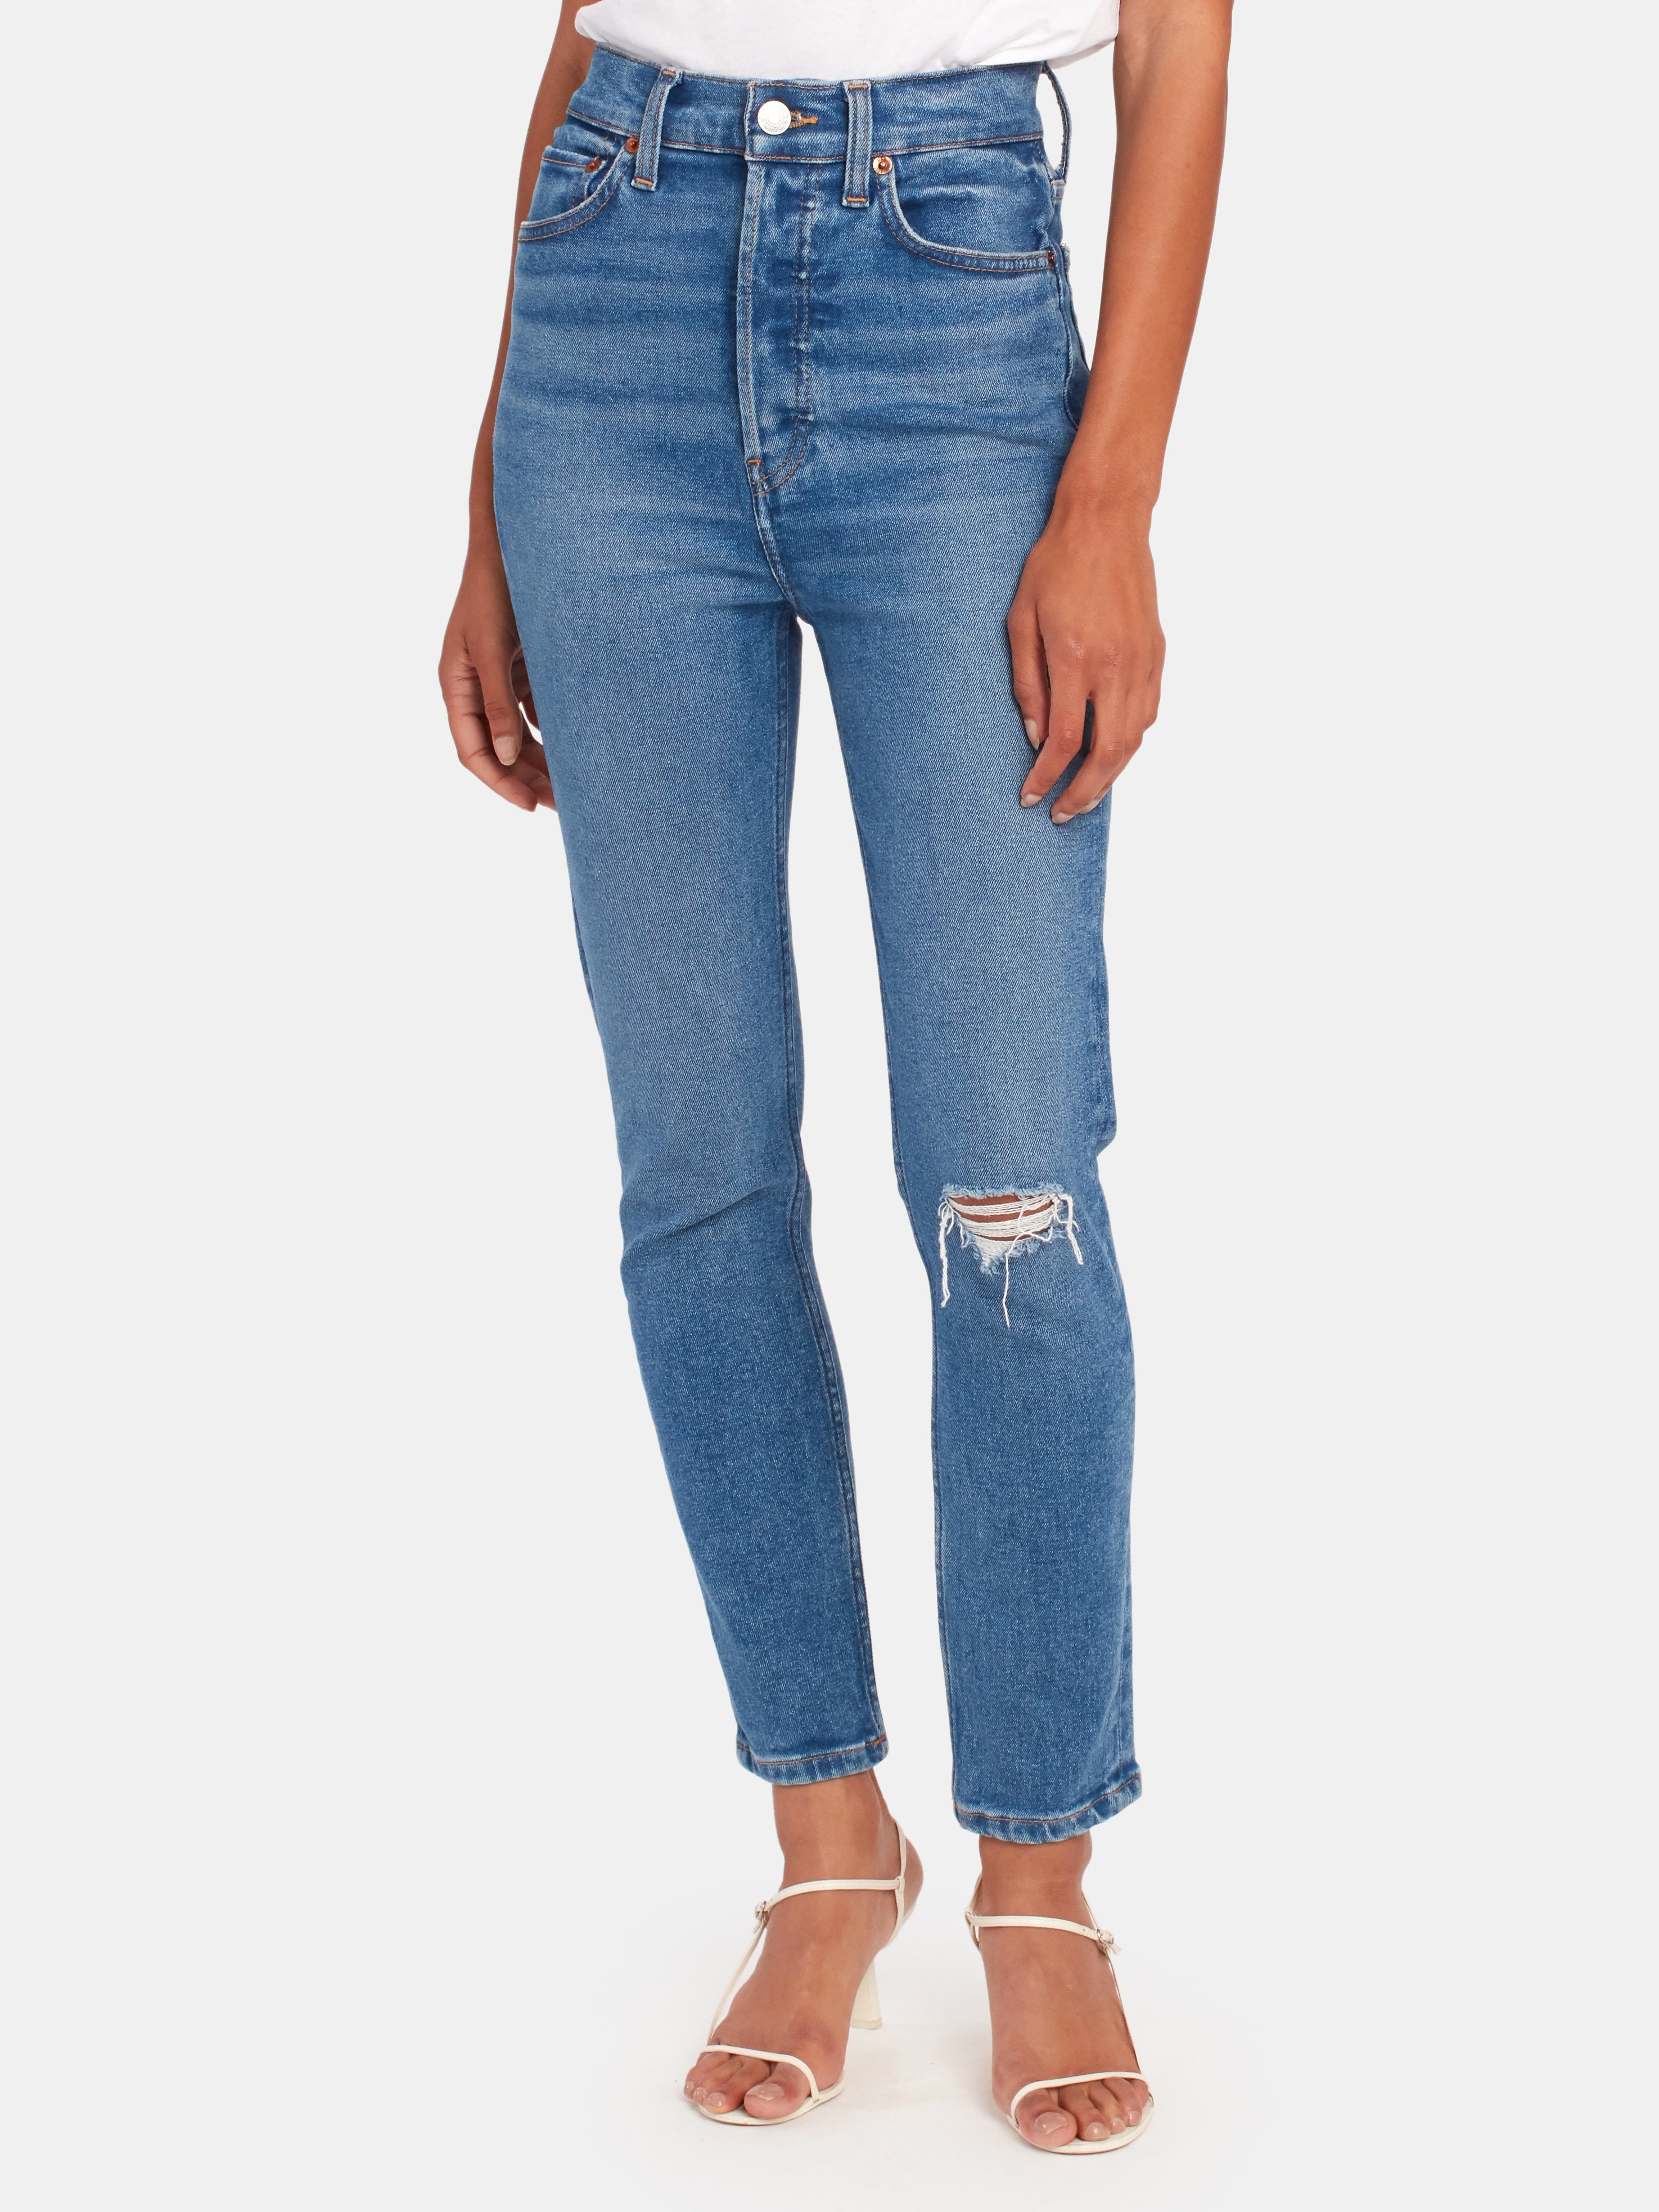 redone jeans high rise ankle crop